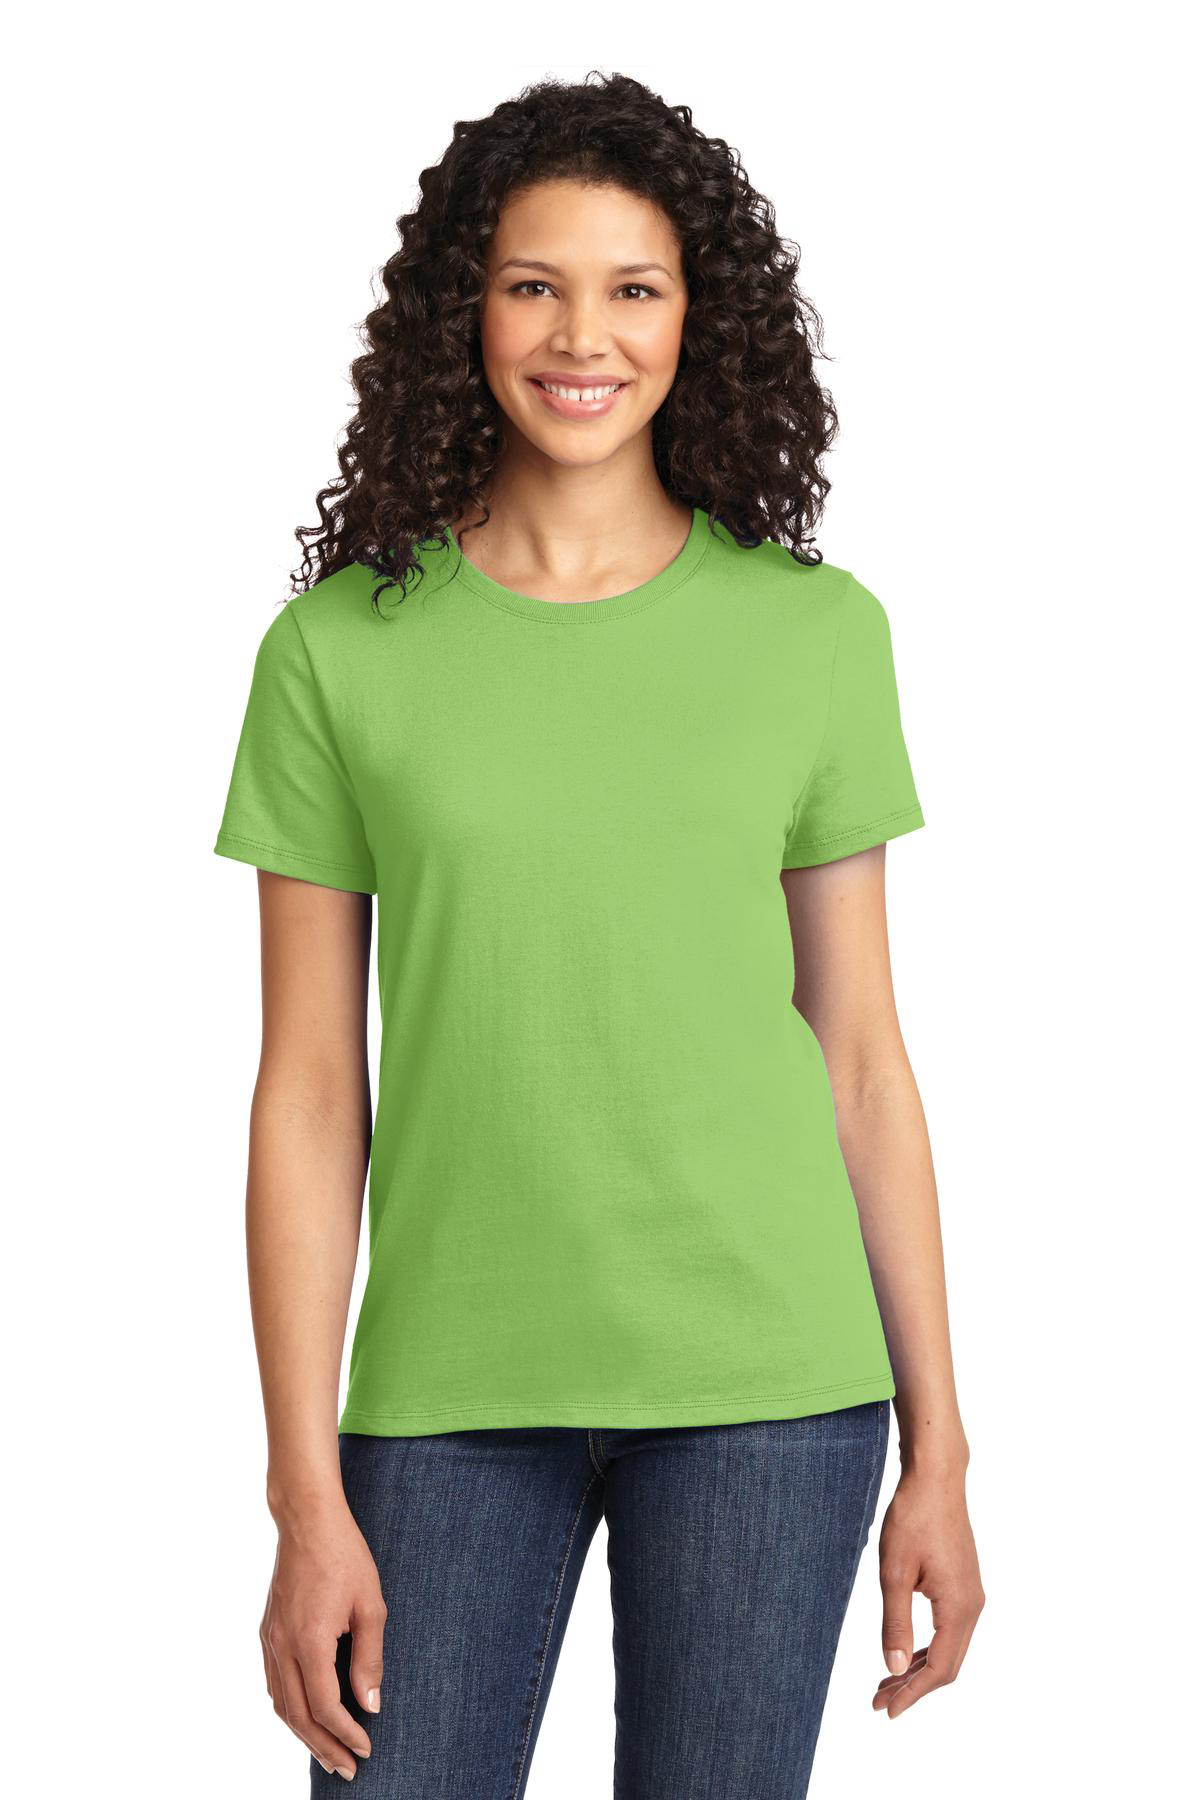 Port And Company Ladies Essential Tee Product Port And Company